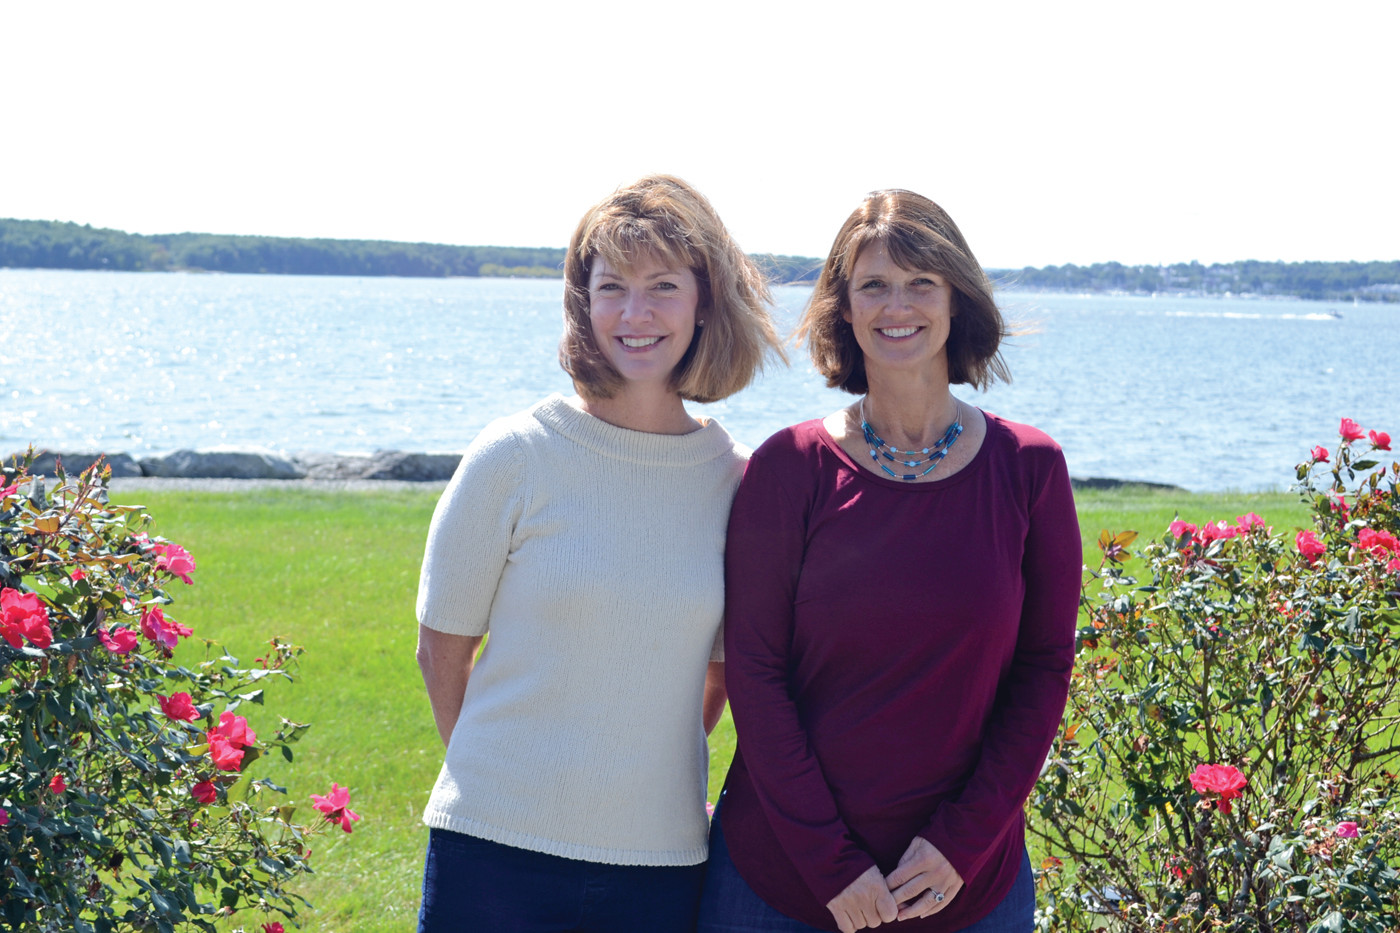 CO-AUTHORS AND FRIENDS: Warwick resident Leigh Brown (left) and Cumberland resident Victoria Corliss began writing together in 2009 and have released three self-published books since.